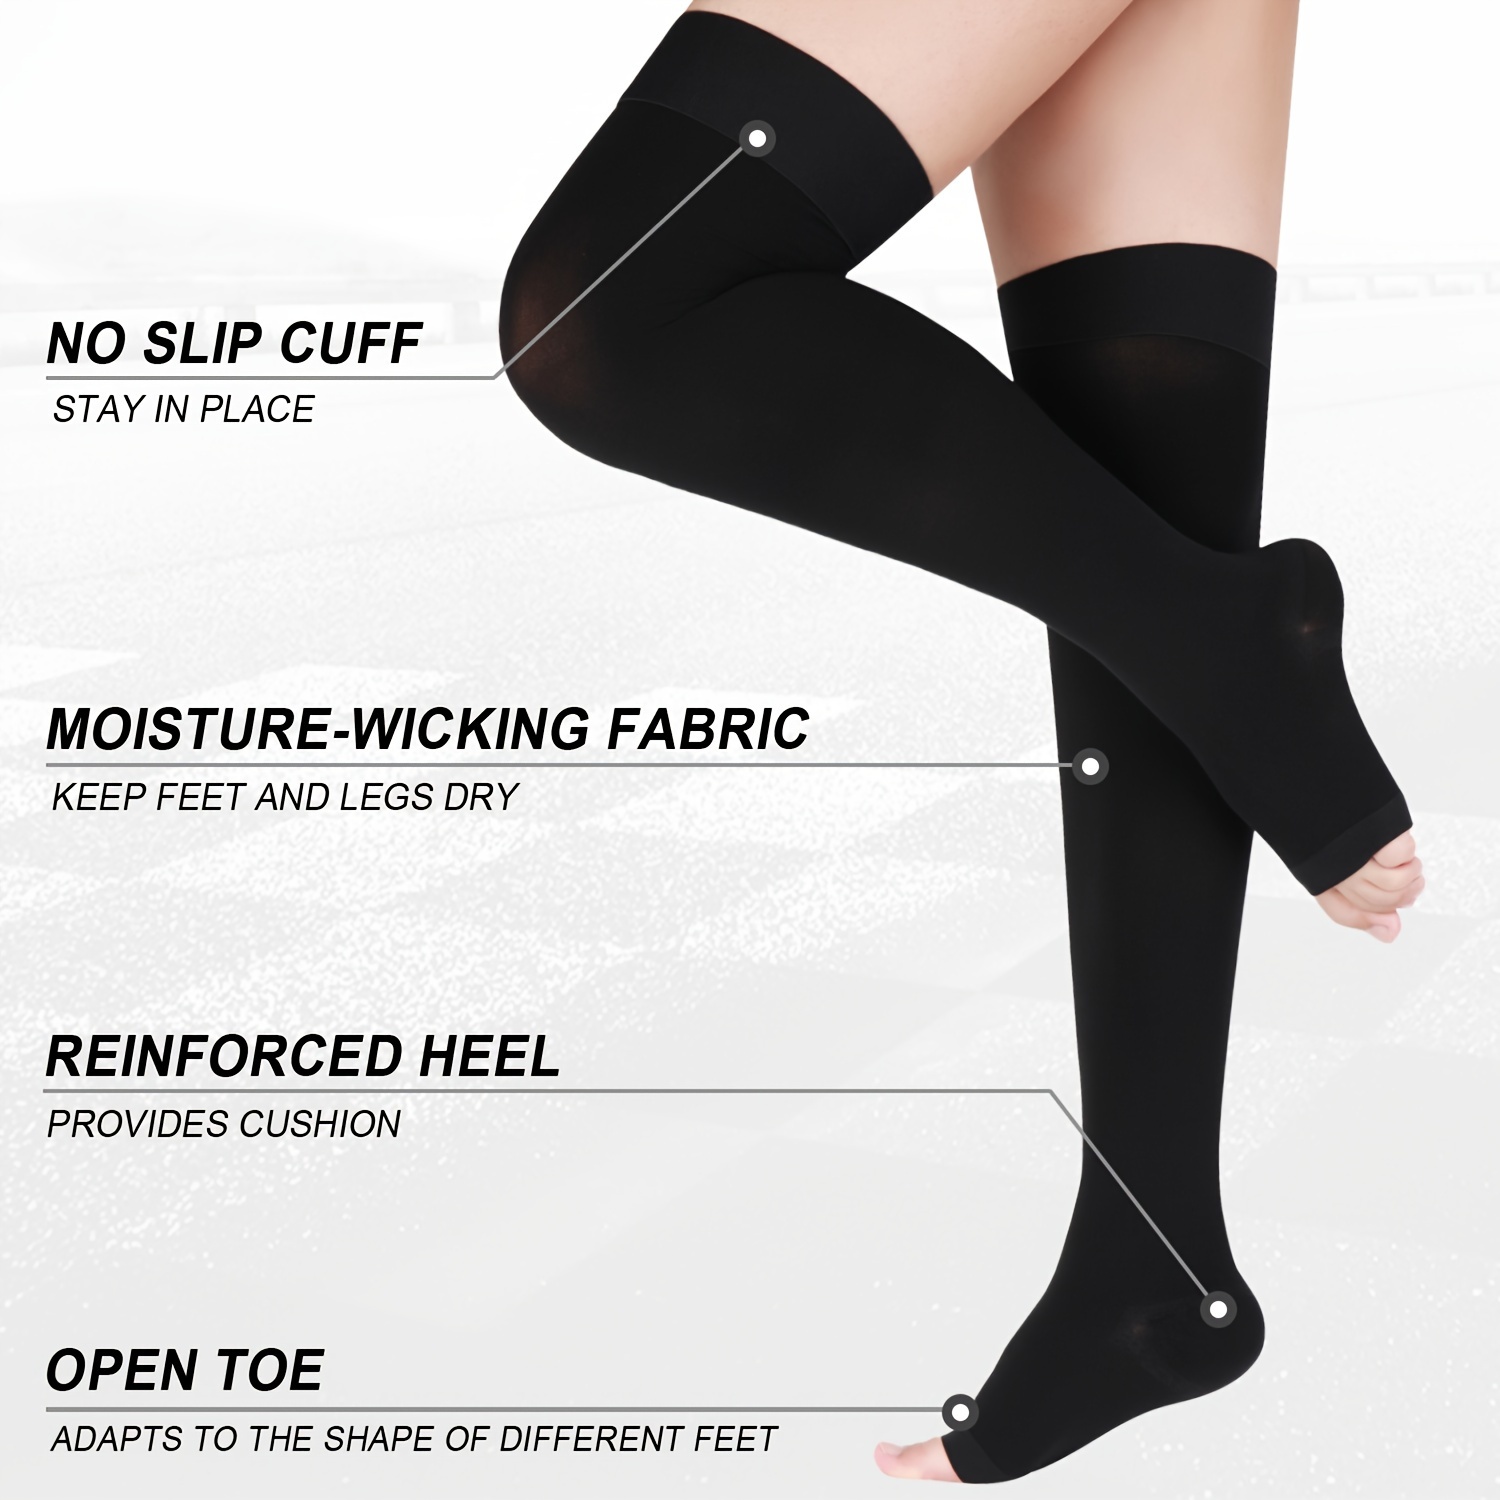  beister Medical Compression Pantyhose for Women & Men,  20-30mmHg Graduated Support Tights, Opaque Footless Waist High Compression  Stockings & Leggings for Varicose Veins, Edema, Flight, DVT : Health &  Household